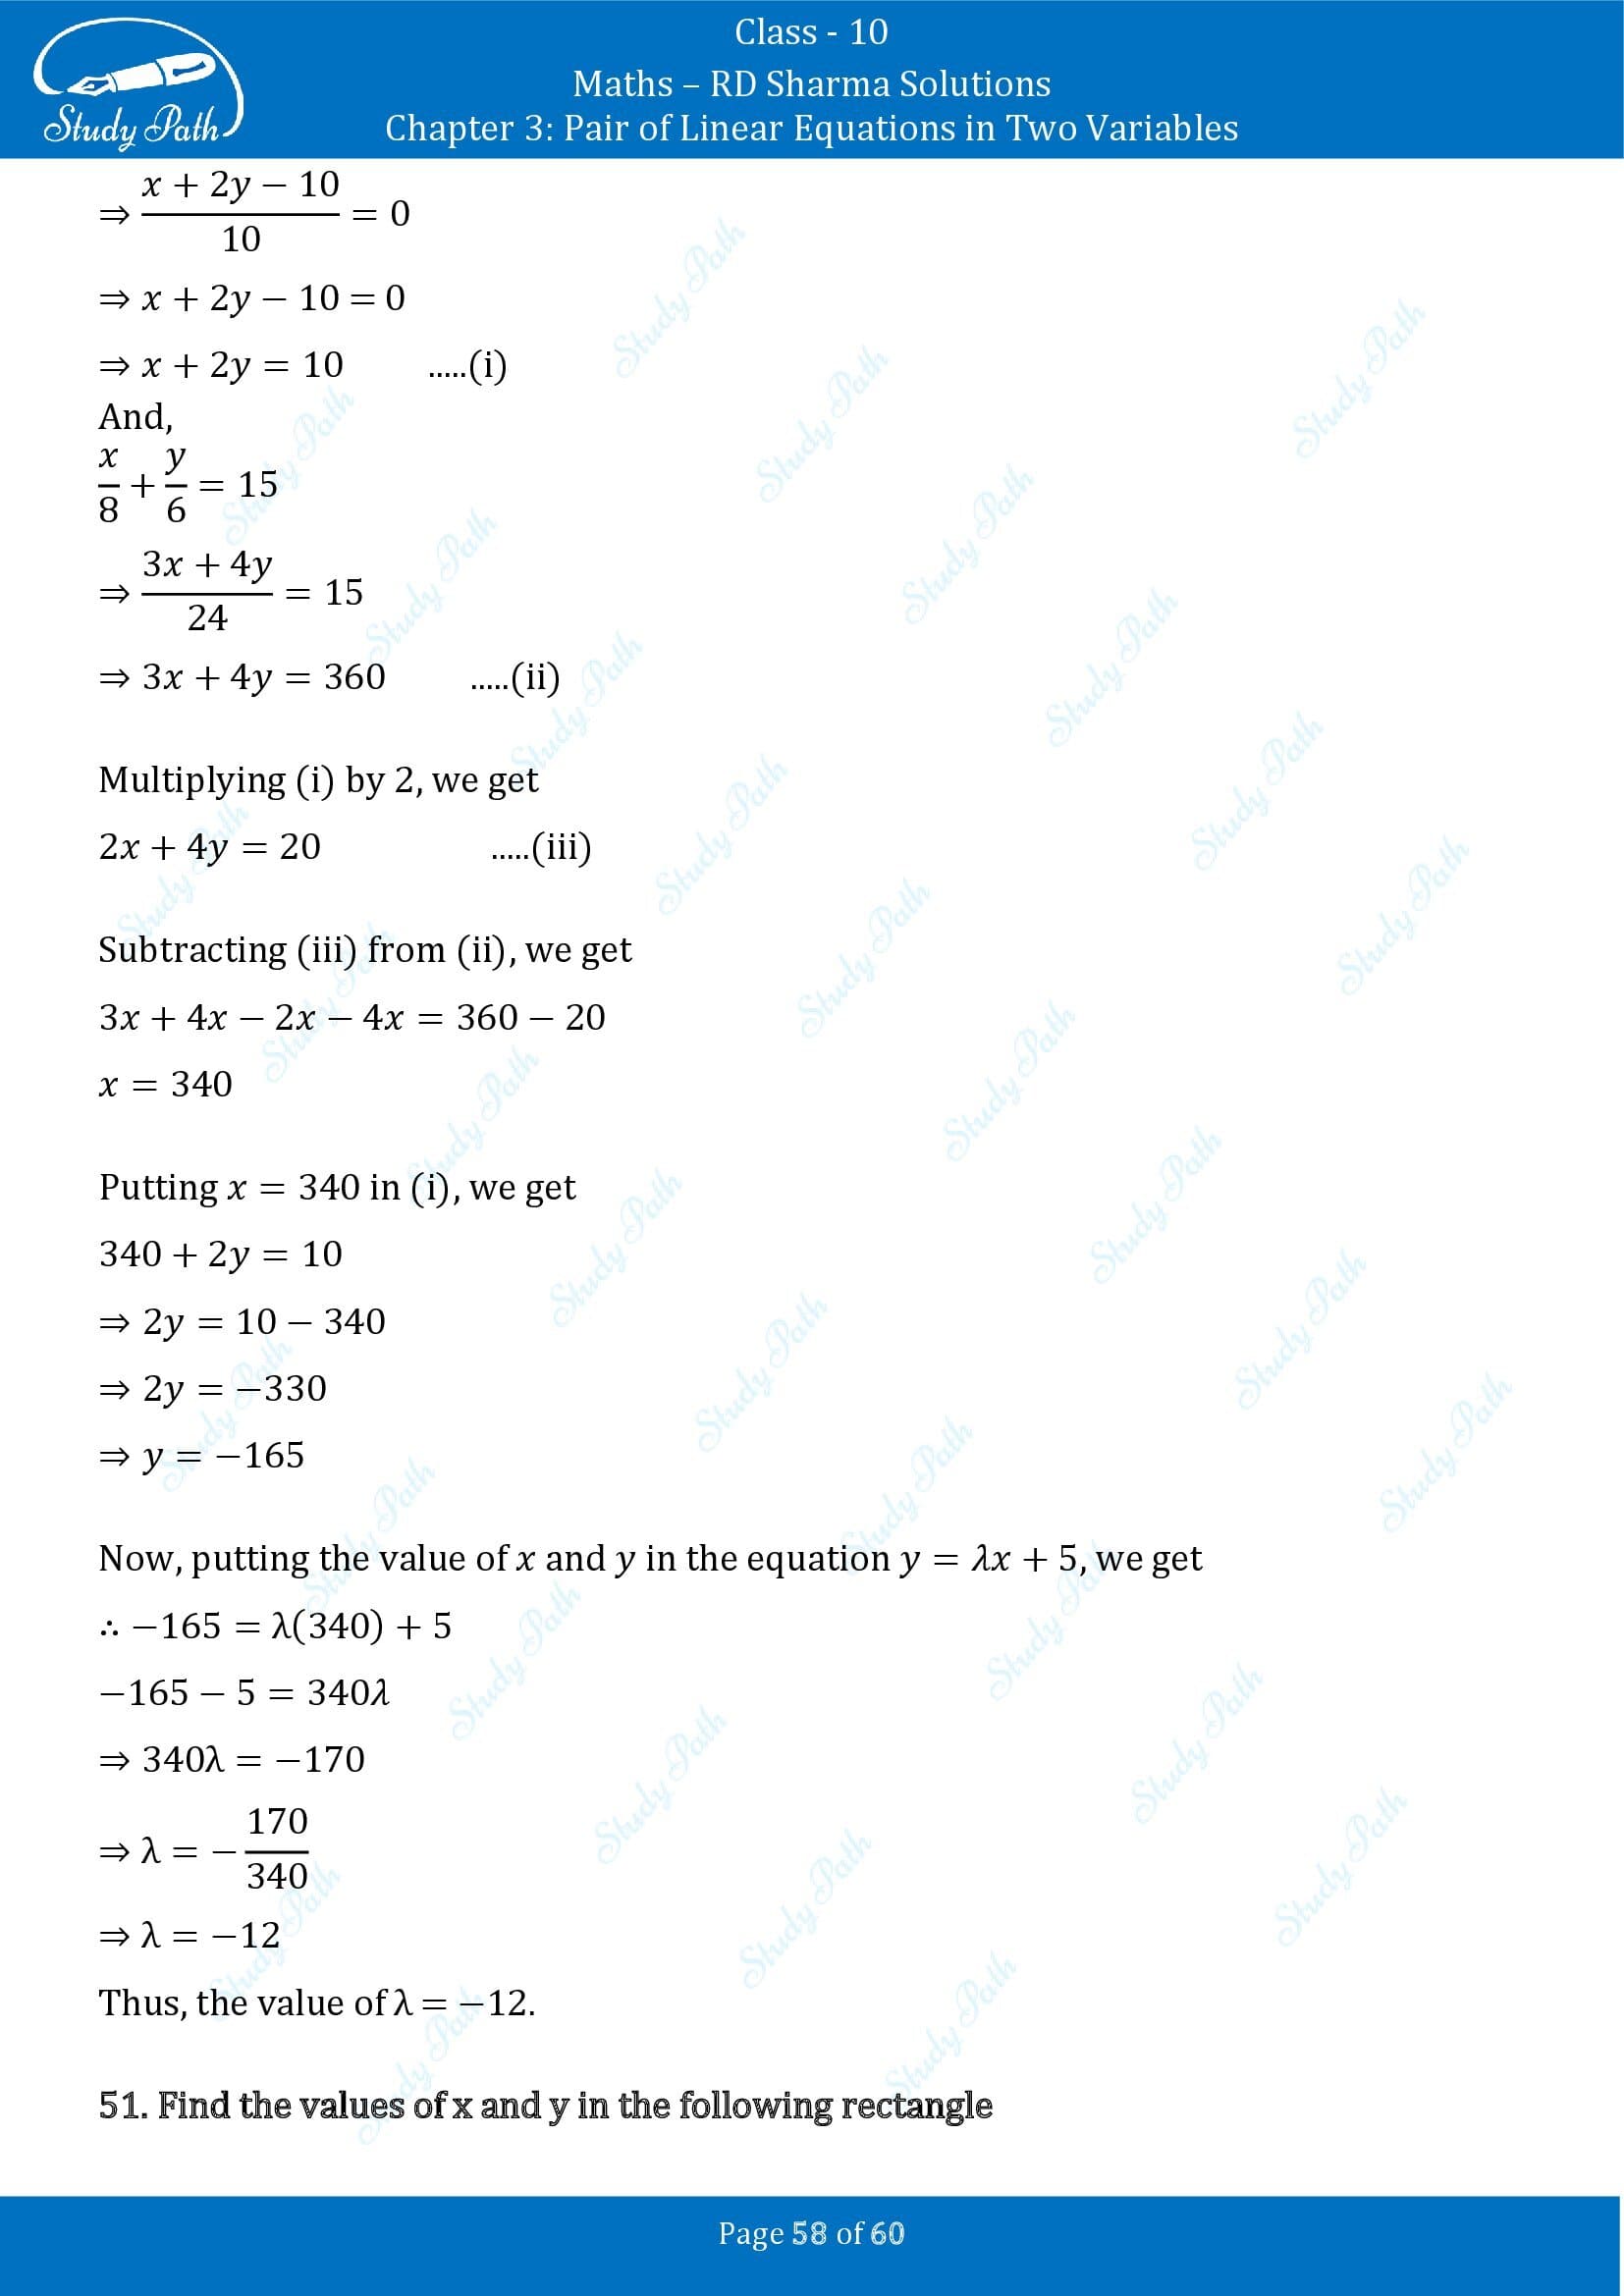 RD Sharma Solutions Class 10 Chapter 3 Pair of Linear Equations in Two Variables Exercise 3.3 00058